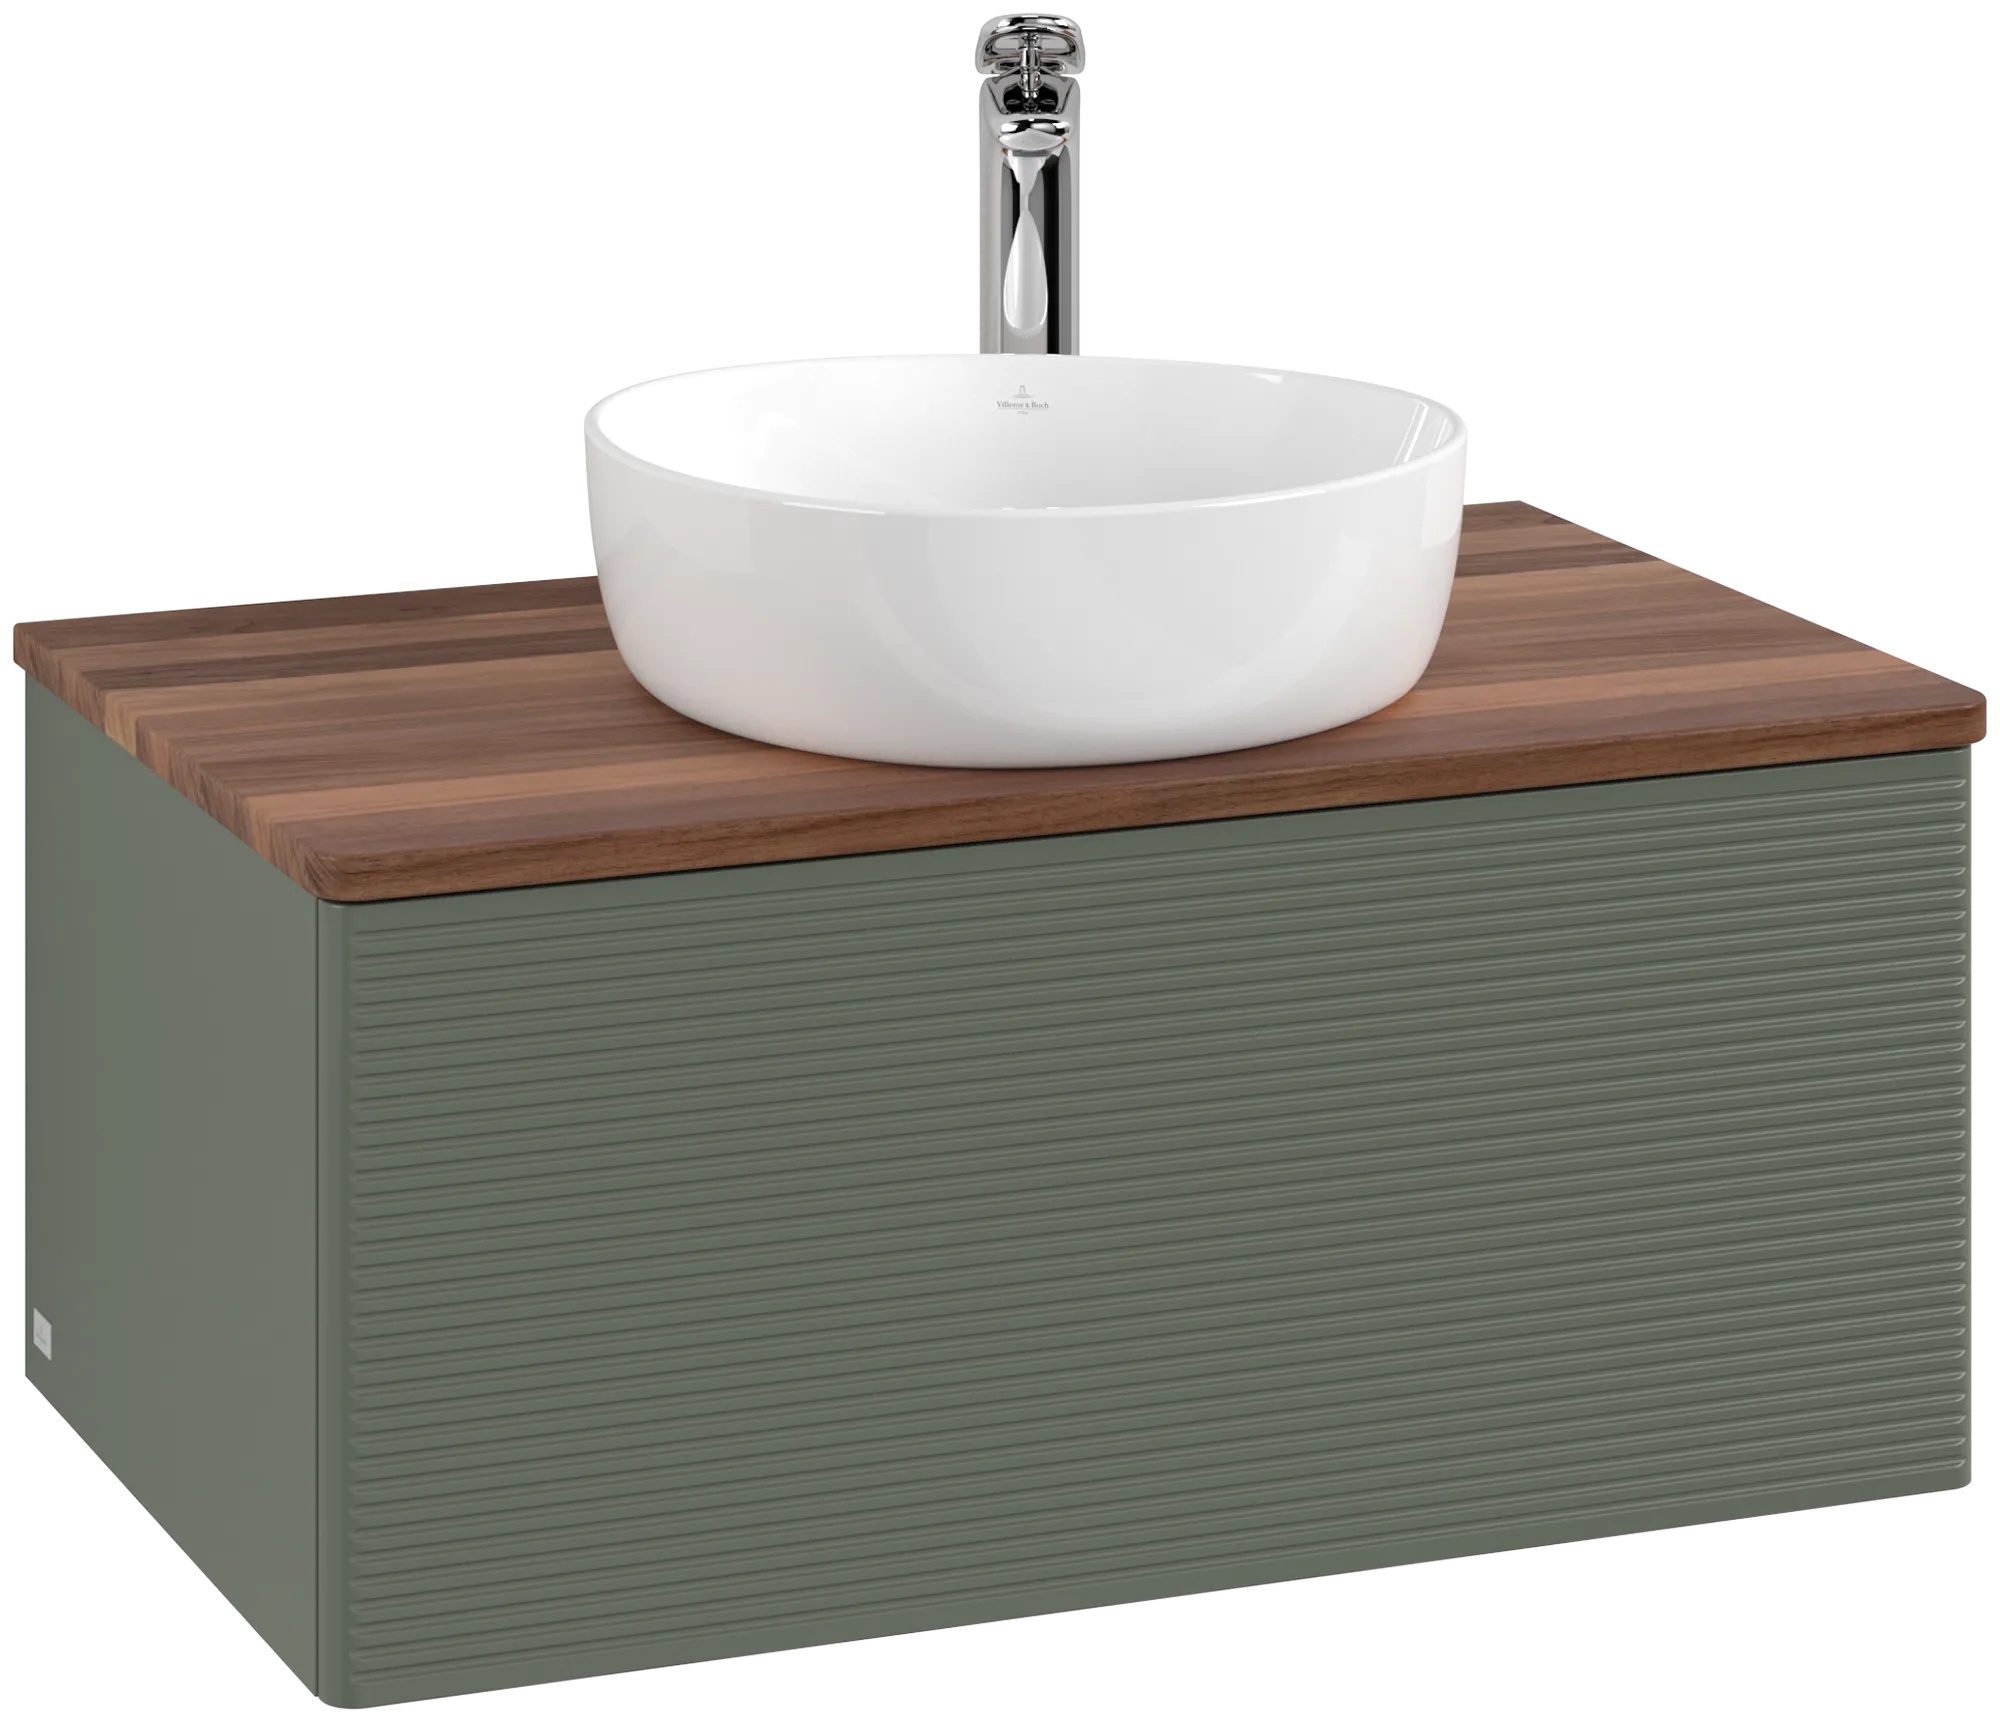 Picture of VILLEROY BOCH Antao Vanity unit, with lighting, 1 pull-out compartment, 800 x 360 x 500 mm, Front with grain texture, Leaf Green Matt Lacquer / Warm Walnut #L30152HL